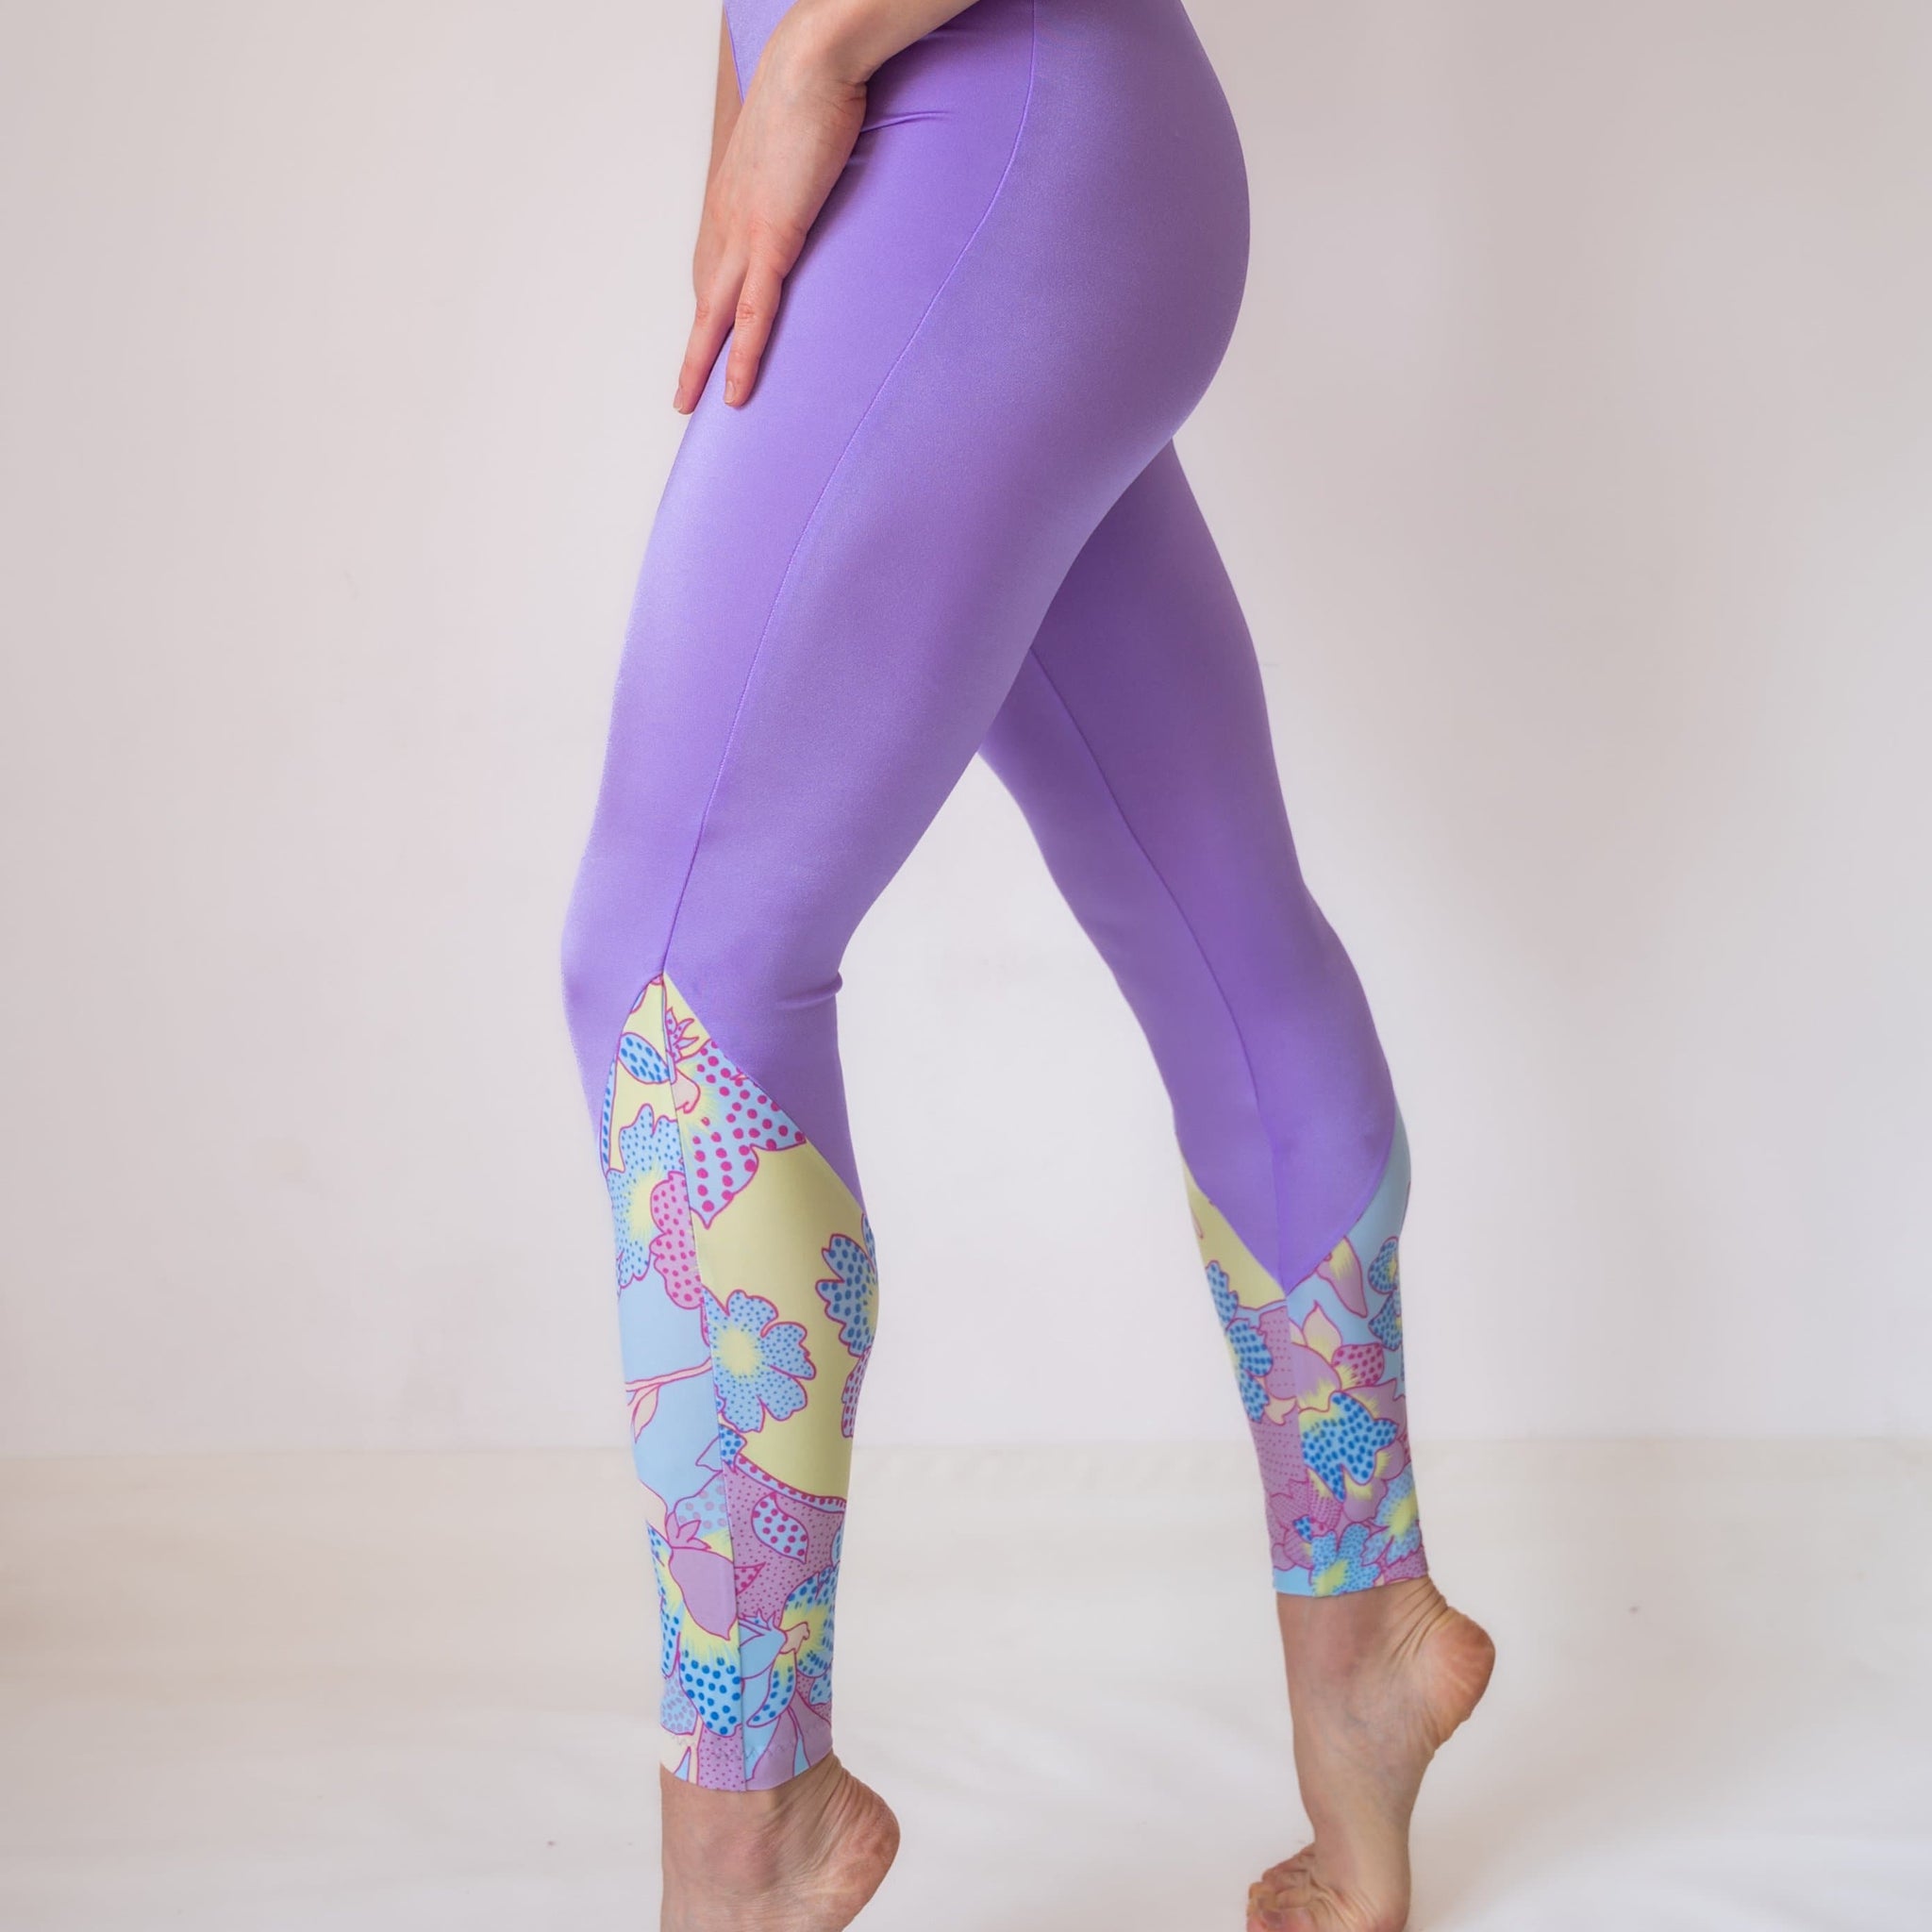 Women's Lilac 7/8 Leggings for Yoga and Fitness Workouts by LENA Activewear